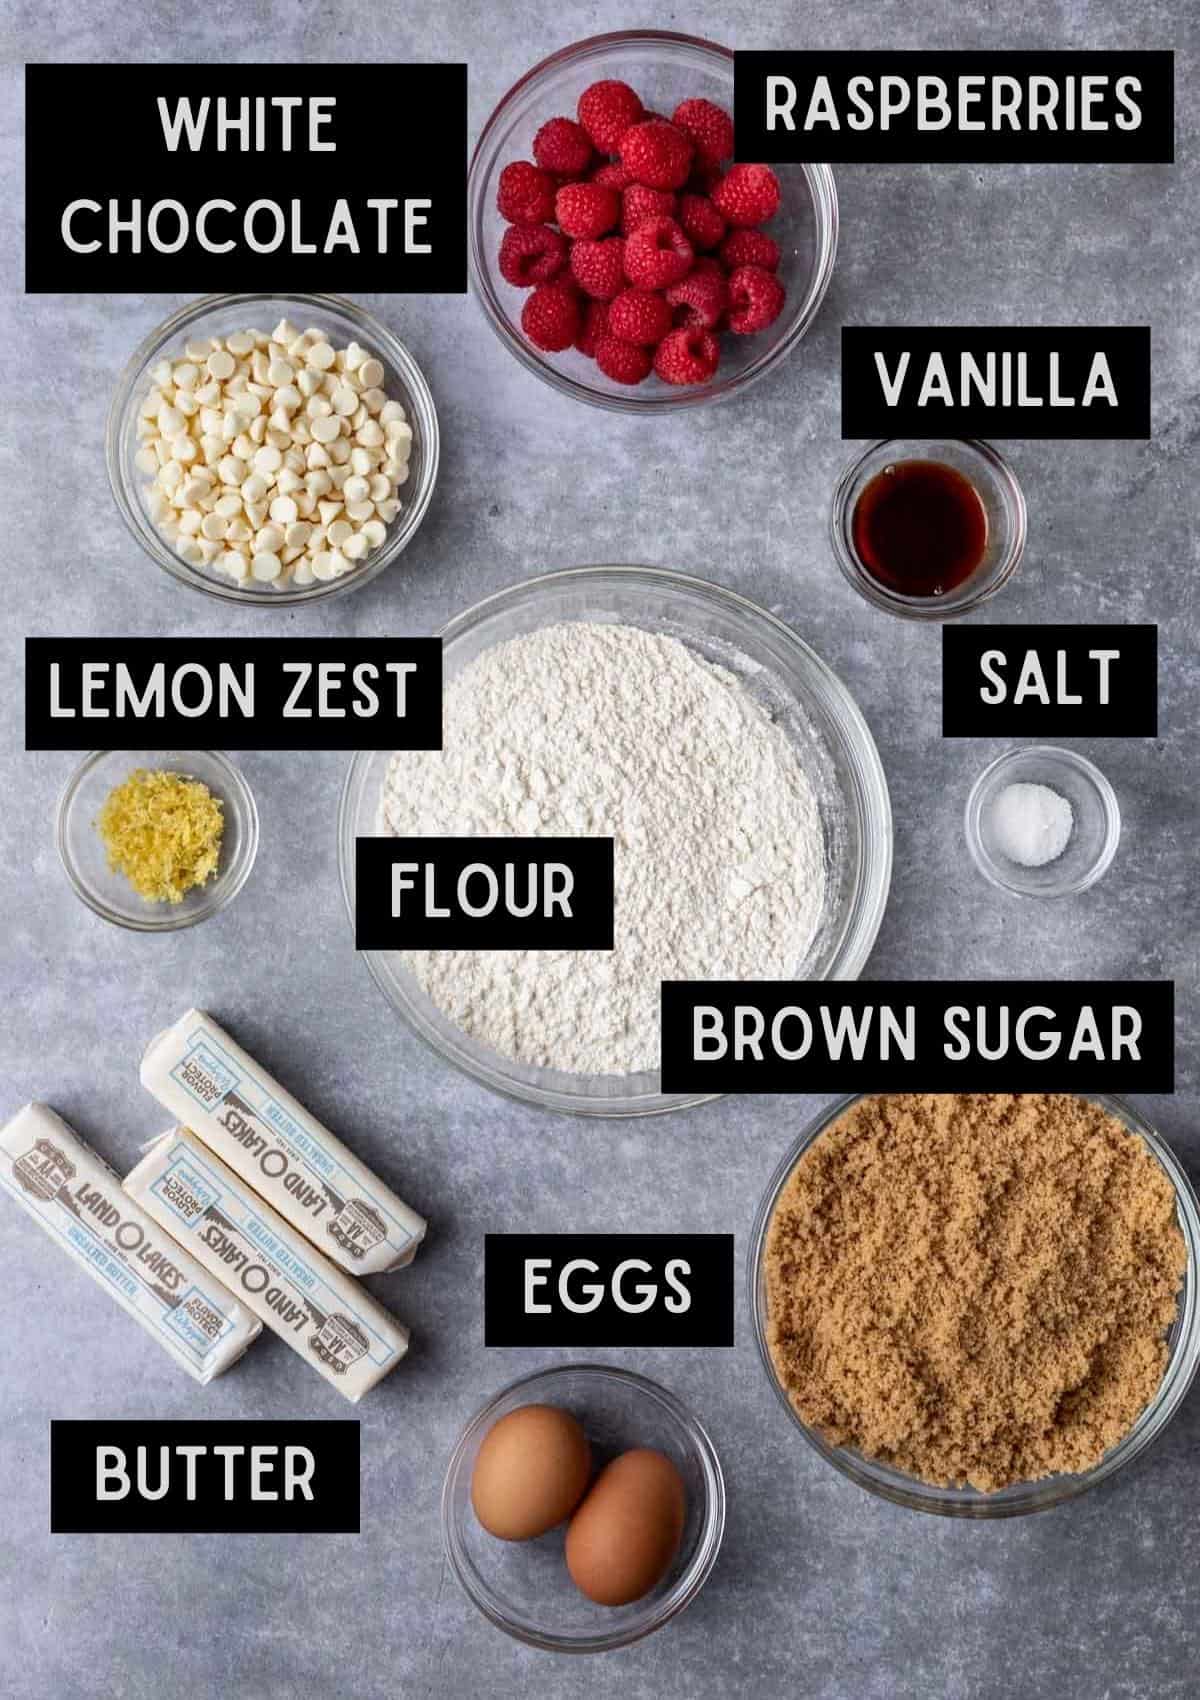 Labelled ingredients for white chocolate raspberry blondies (see recipe for details).